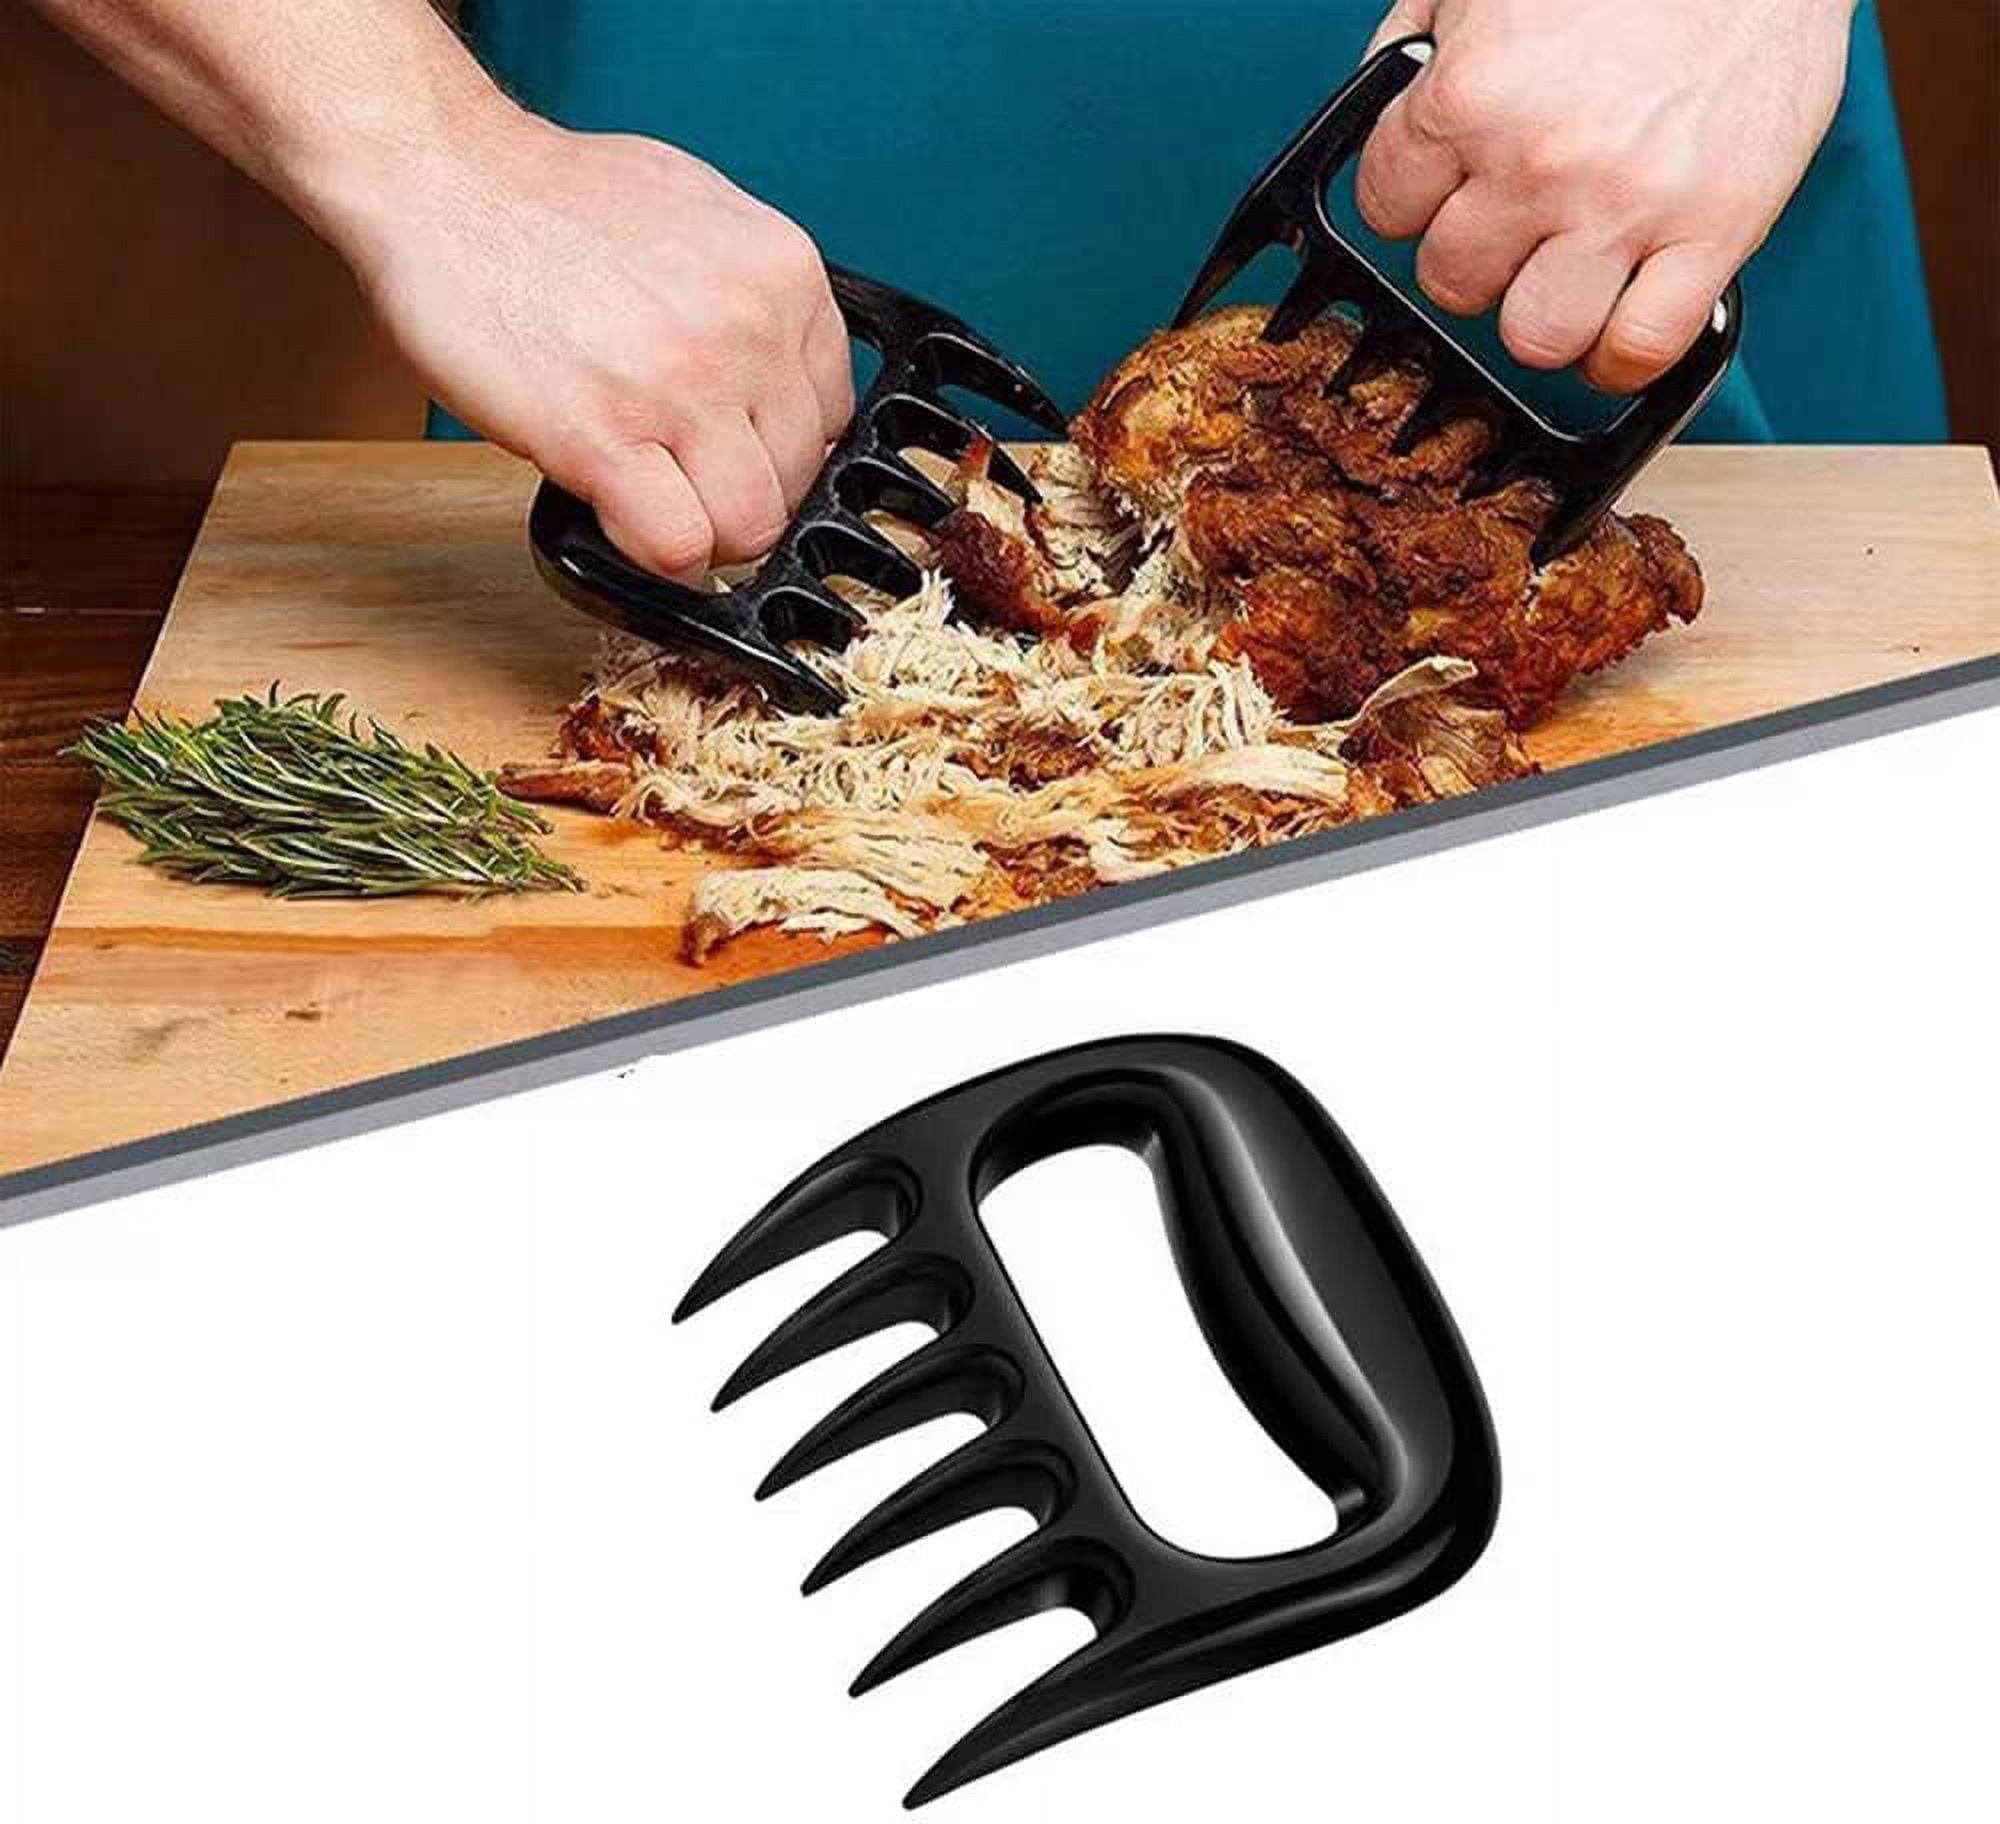 1Pc Barbecue Tool Bear Claw,Meat Cutter Meat Shredder Stainless Steel for  Shredding Pulling Lifting Pork Turkey Beef,Red 